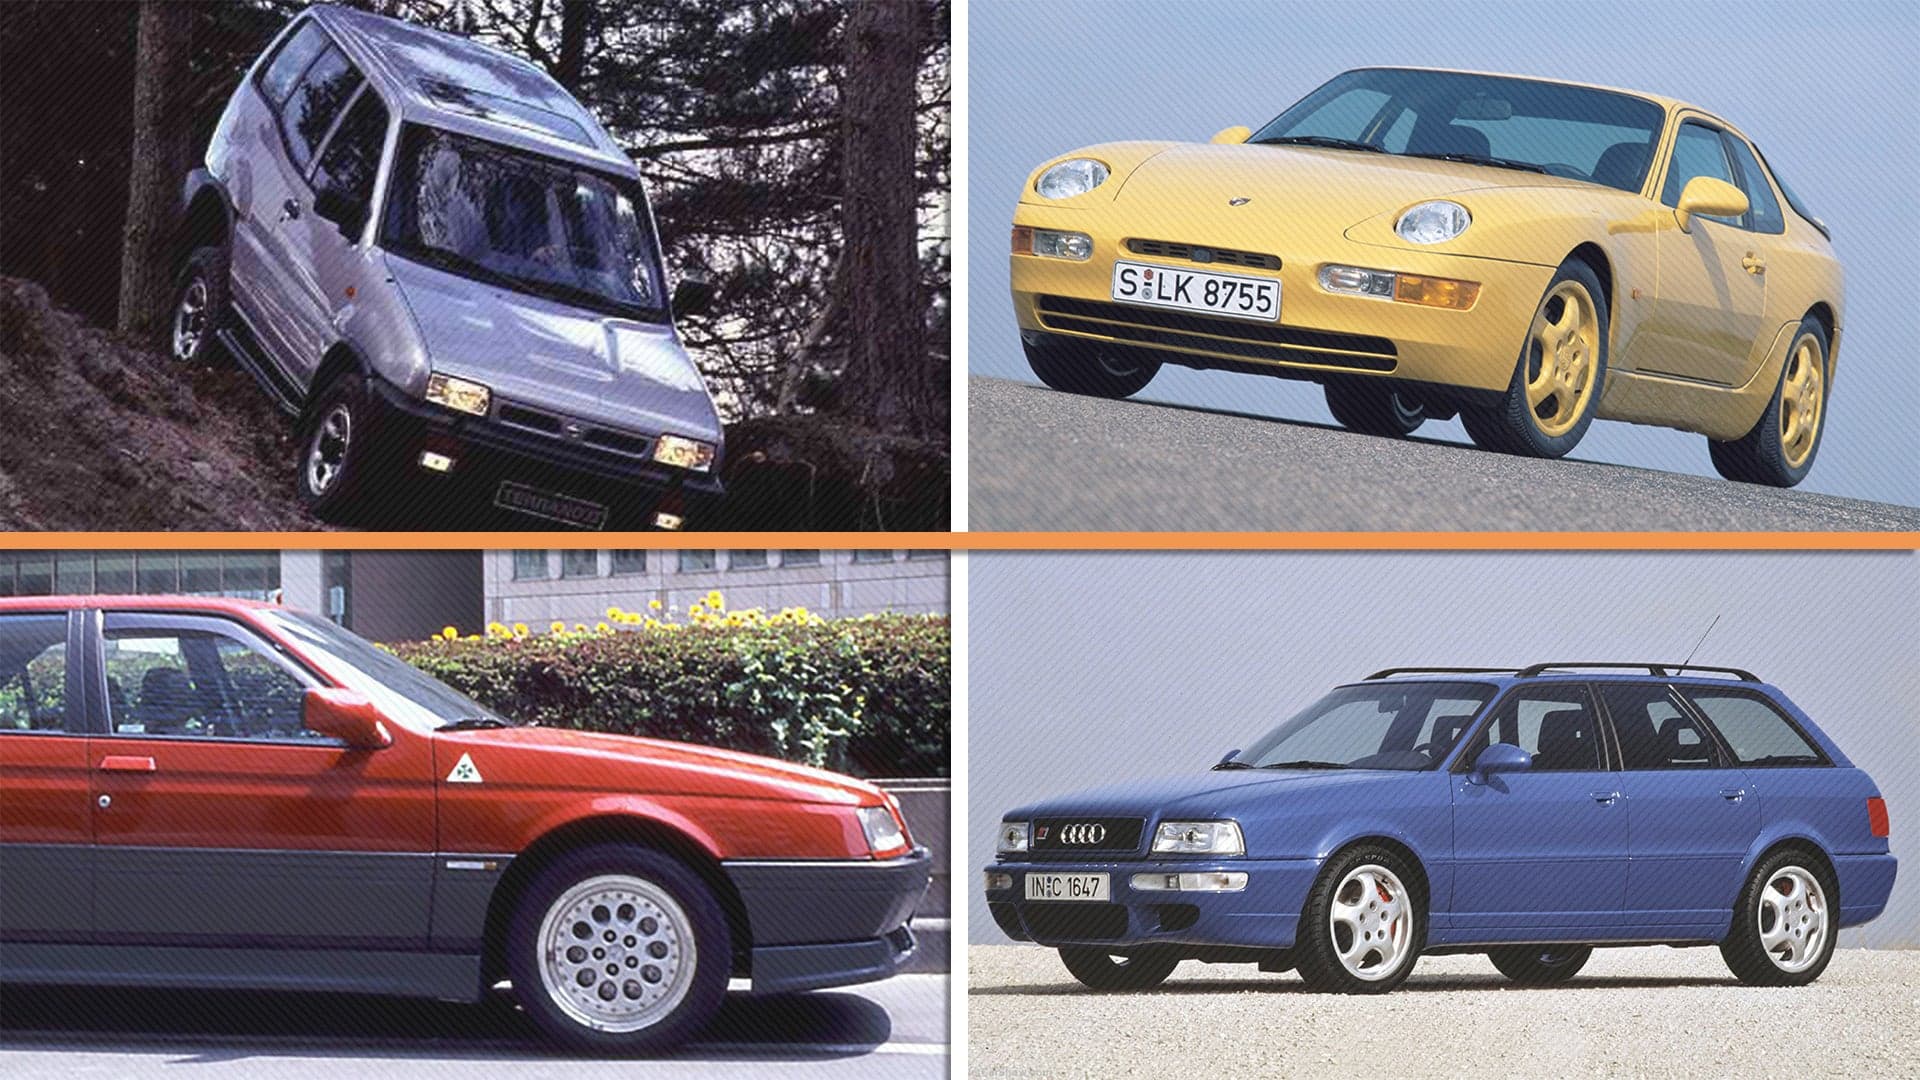 Top 10 Cars From 1994 You Can Finally Import Under America’s 25-Year Law